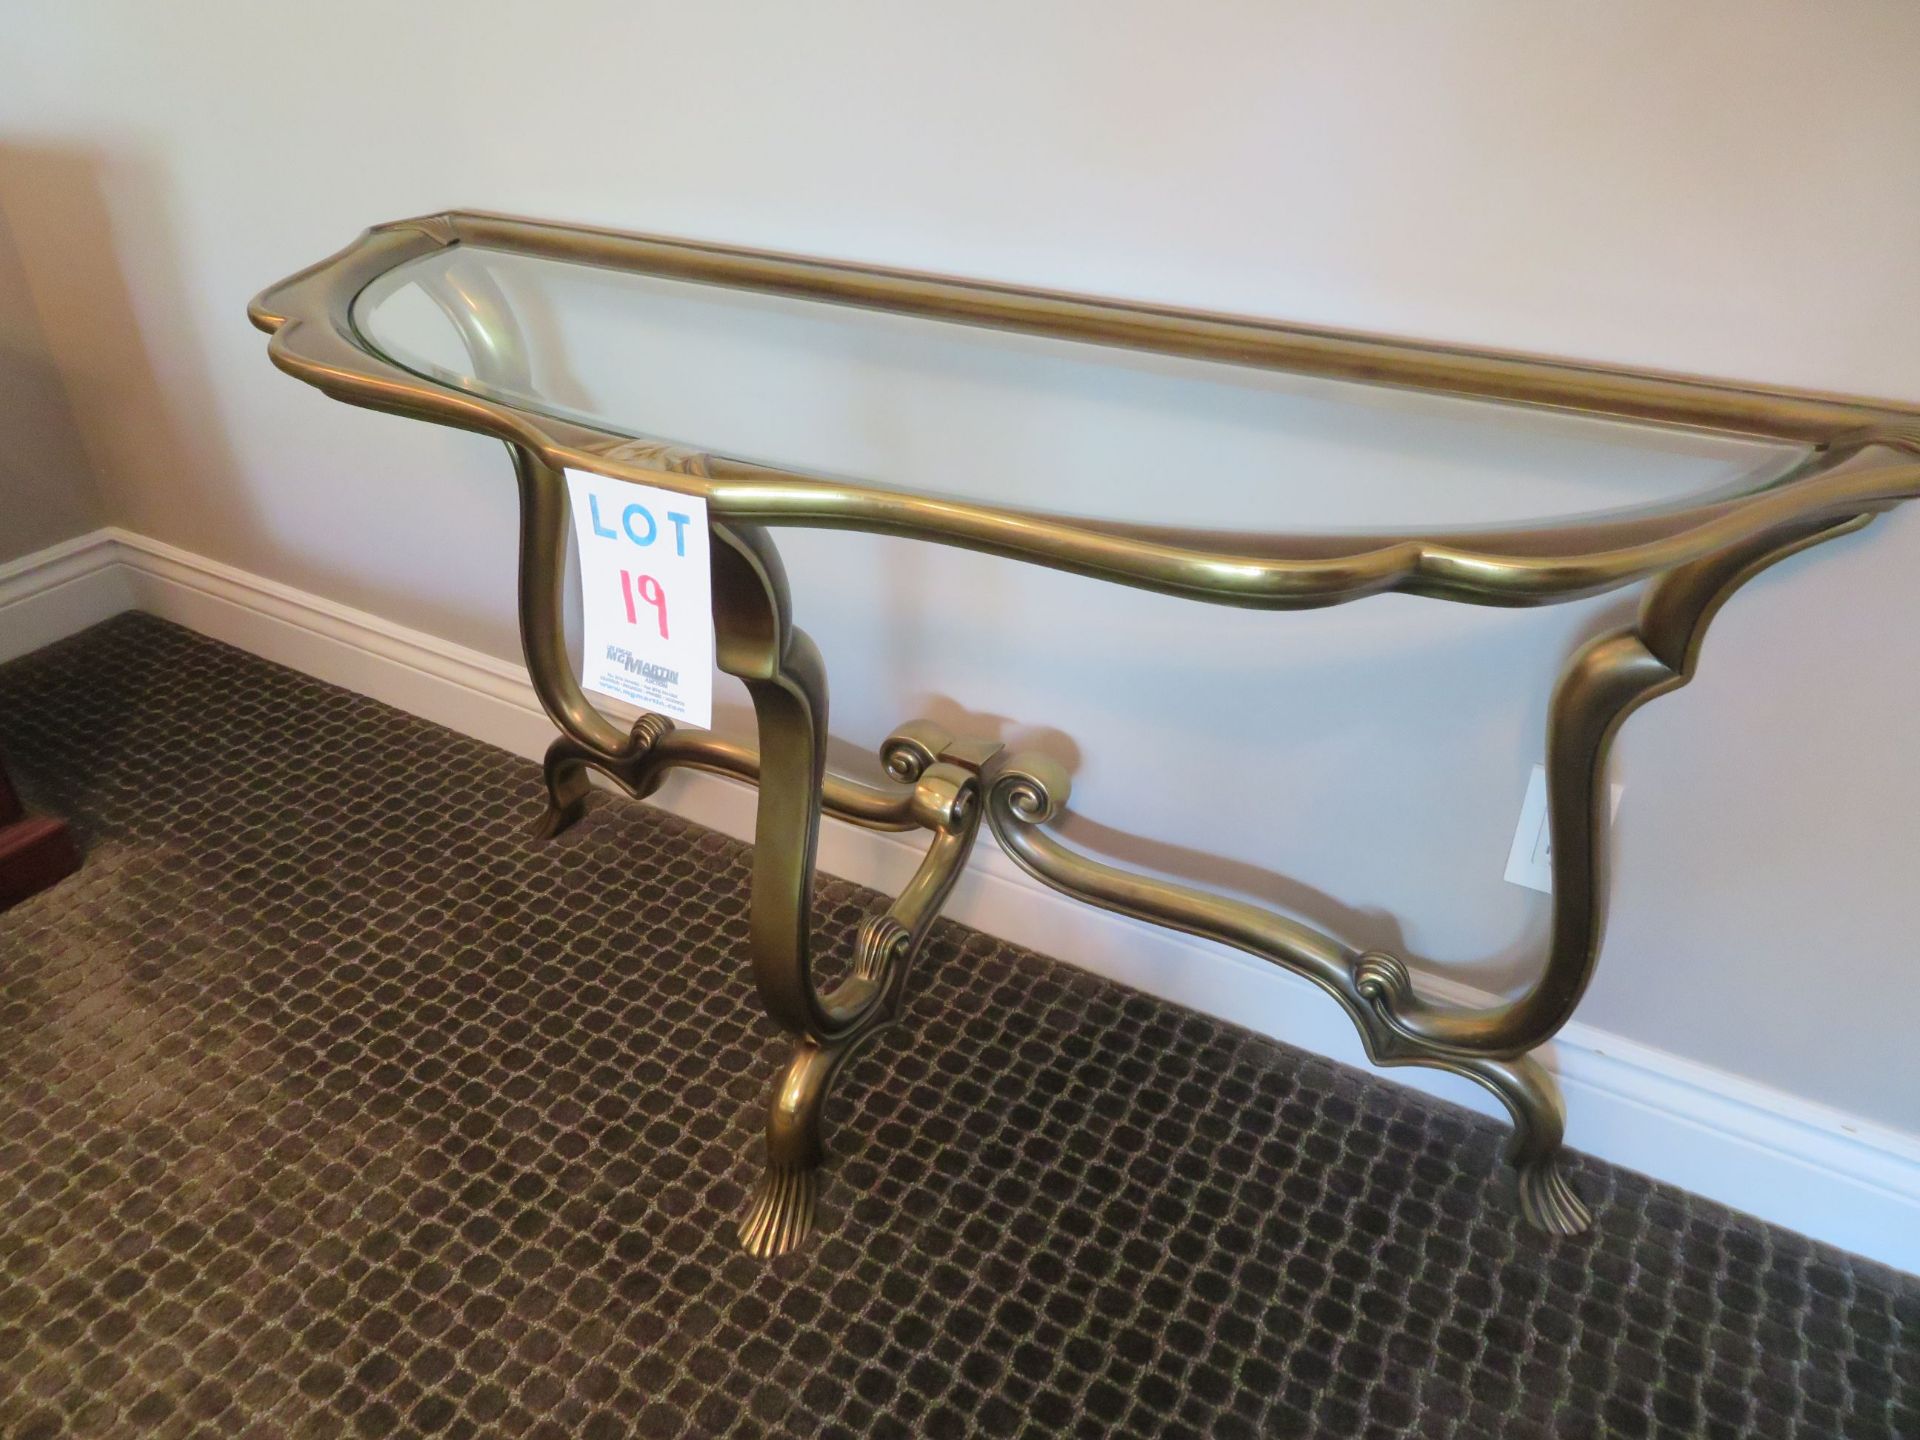 Decorative brass table with glass approx. 52"w x 19"d x 28"h - Image 2 of 3